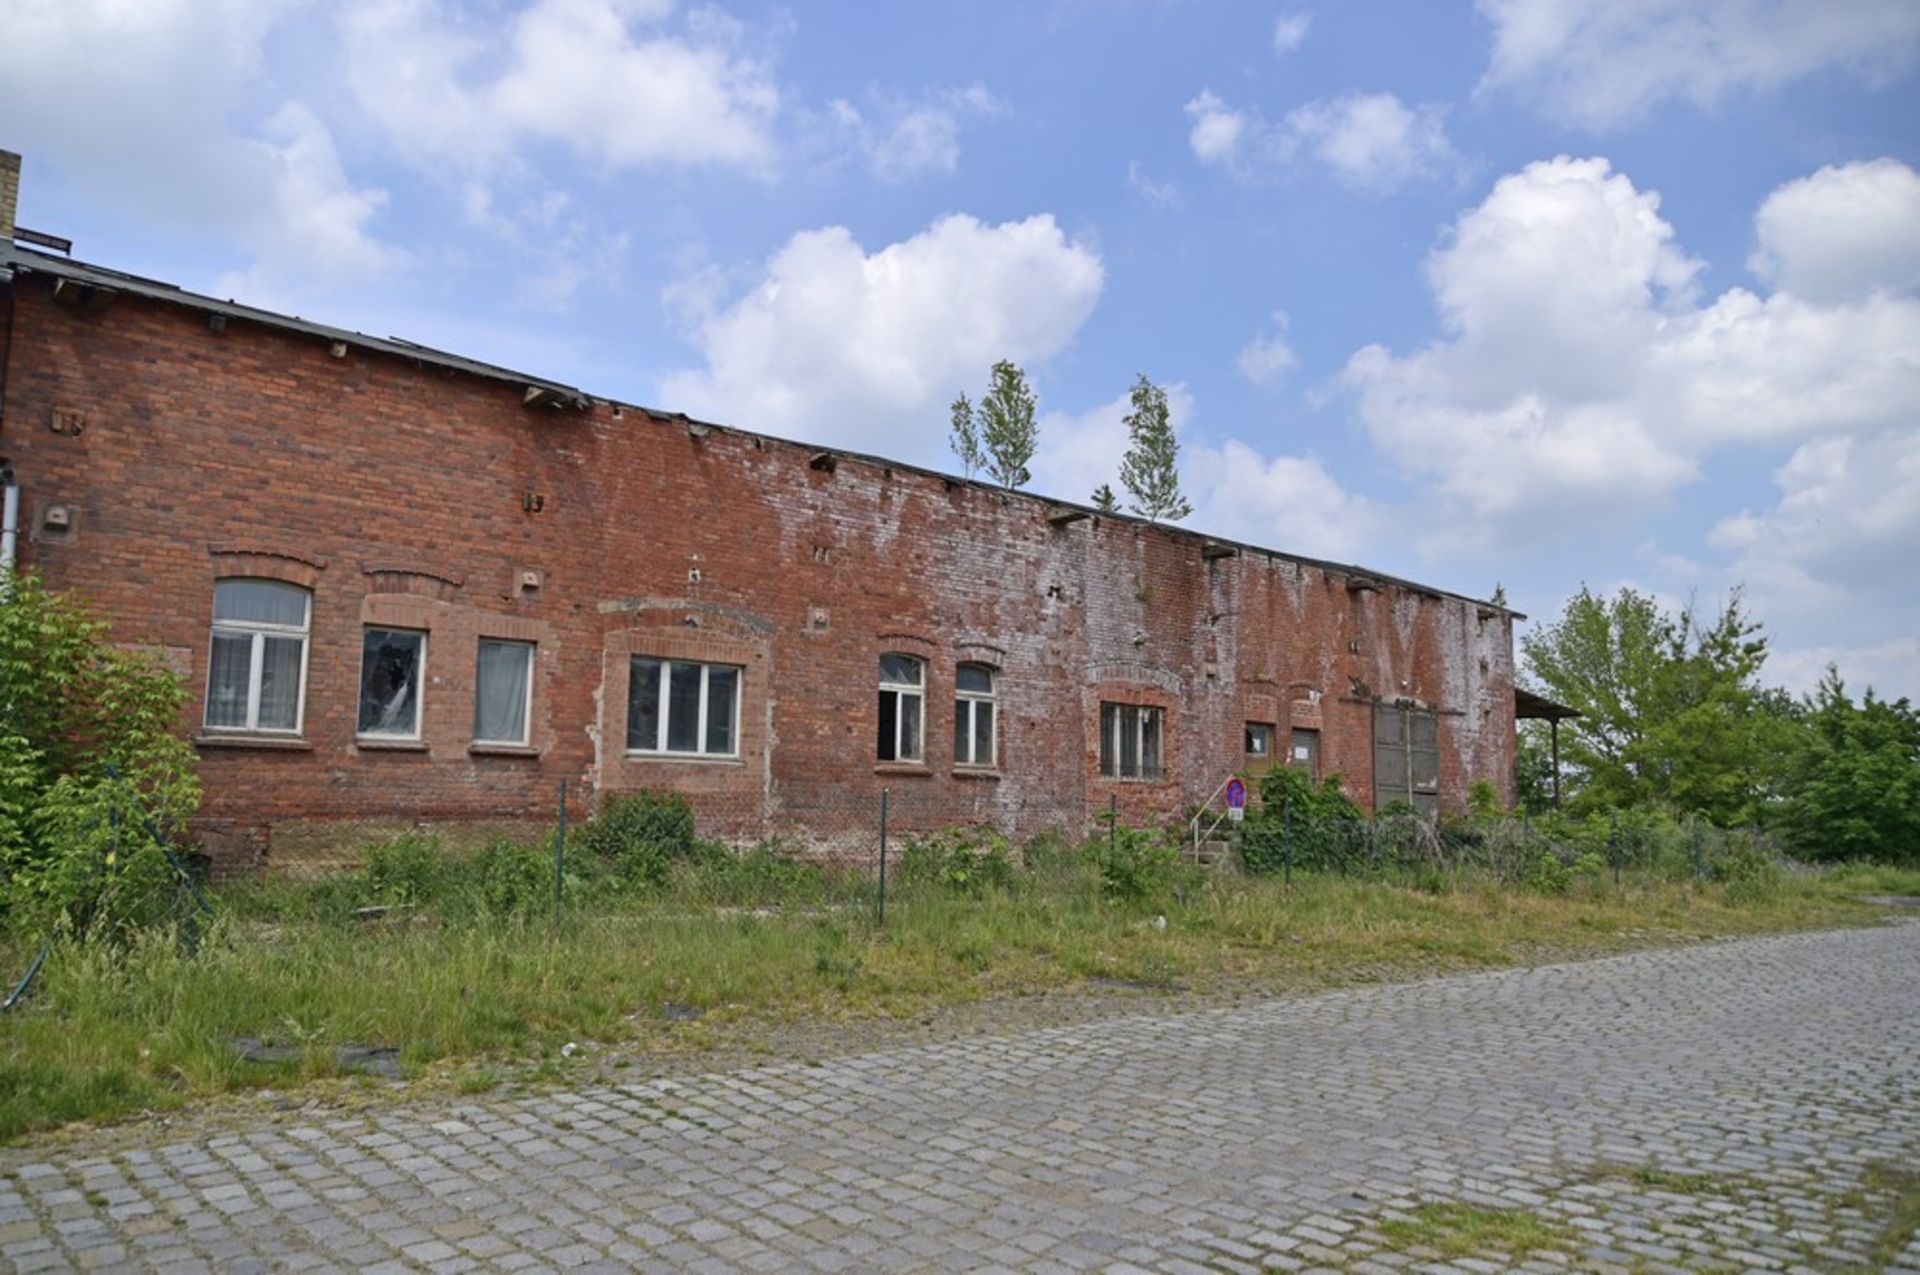 STATION HOUSE, GOODS SHED, OVER ONE ACRE Tangerhütte, Saxony, Germany, - Image 37 of 98